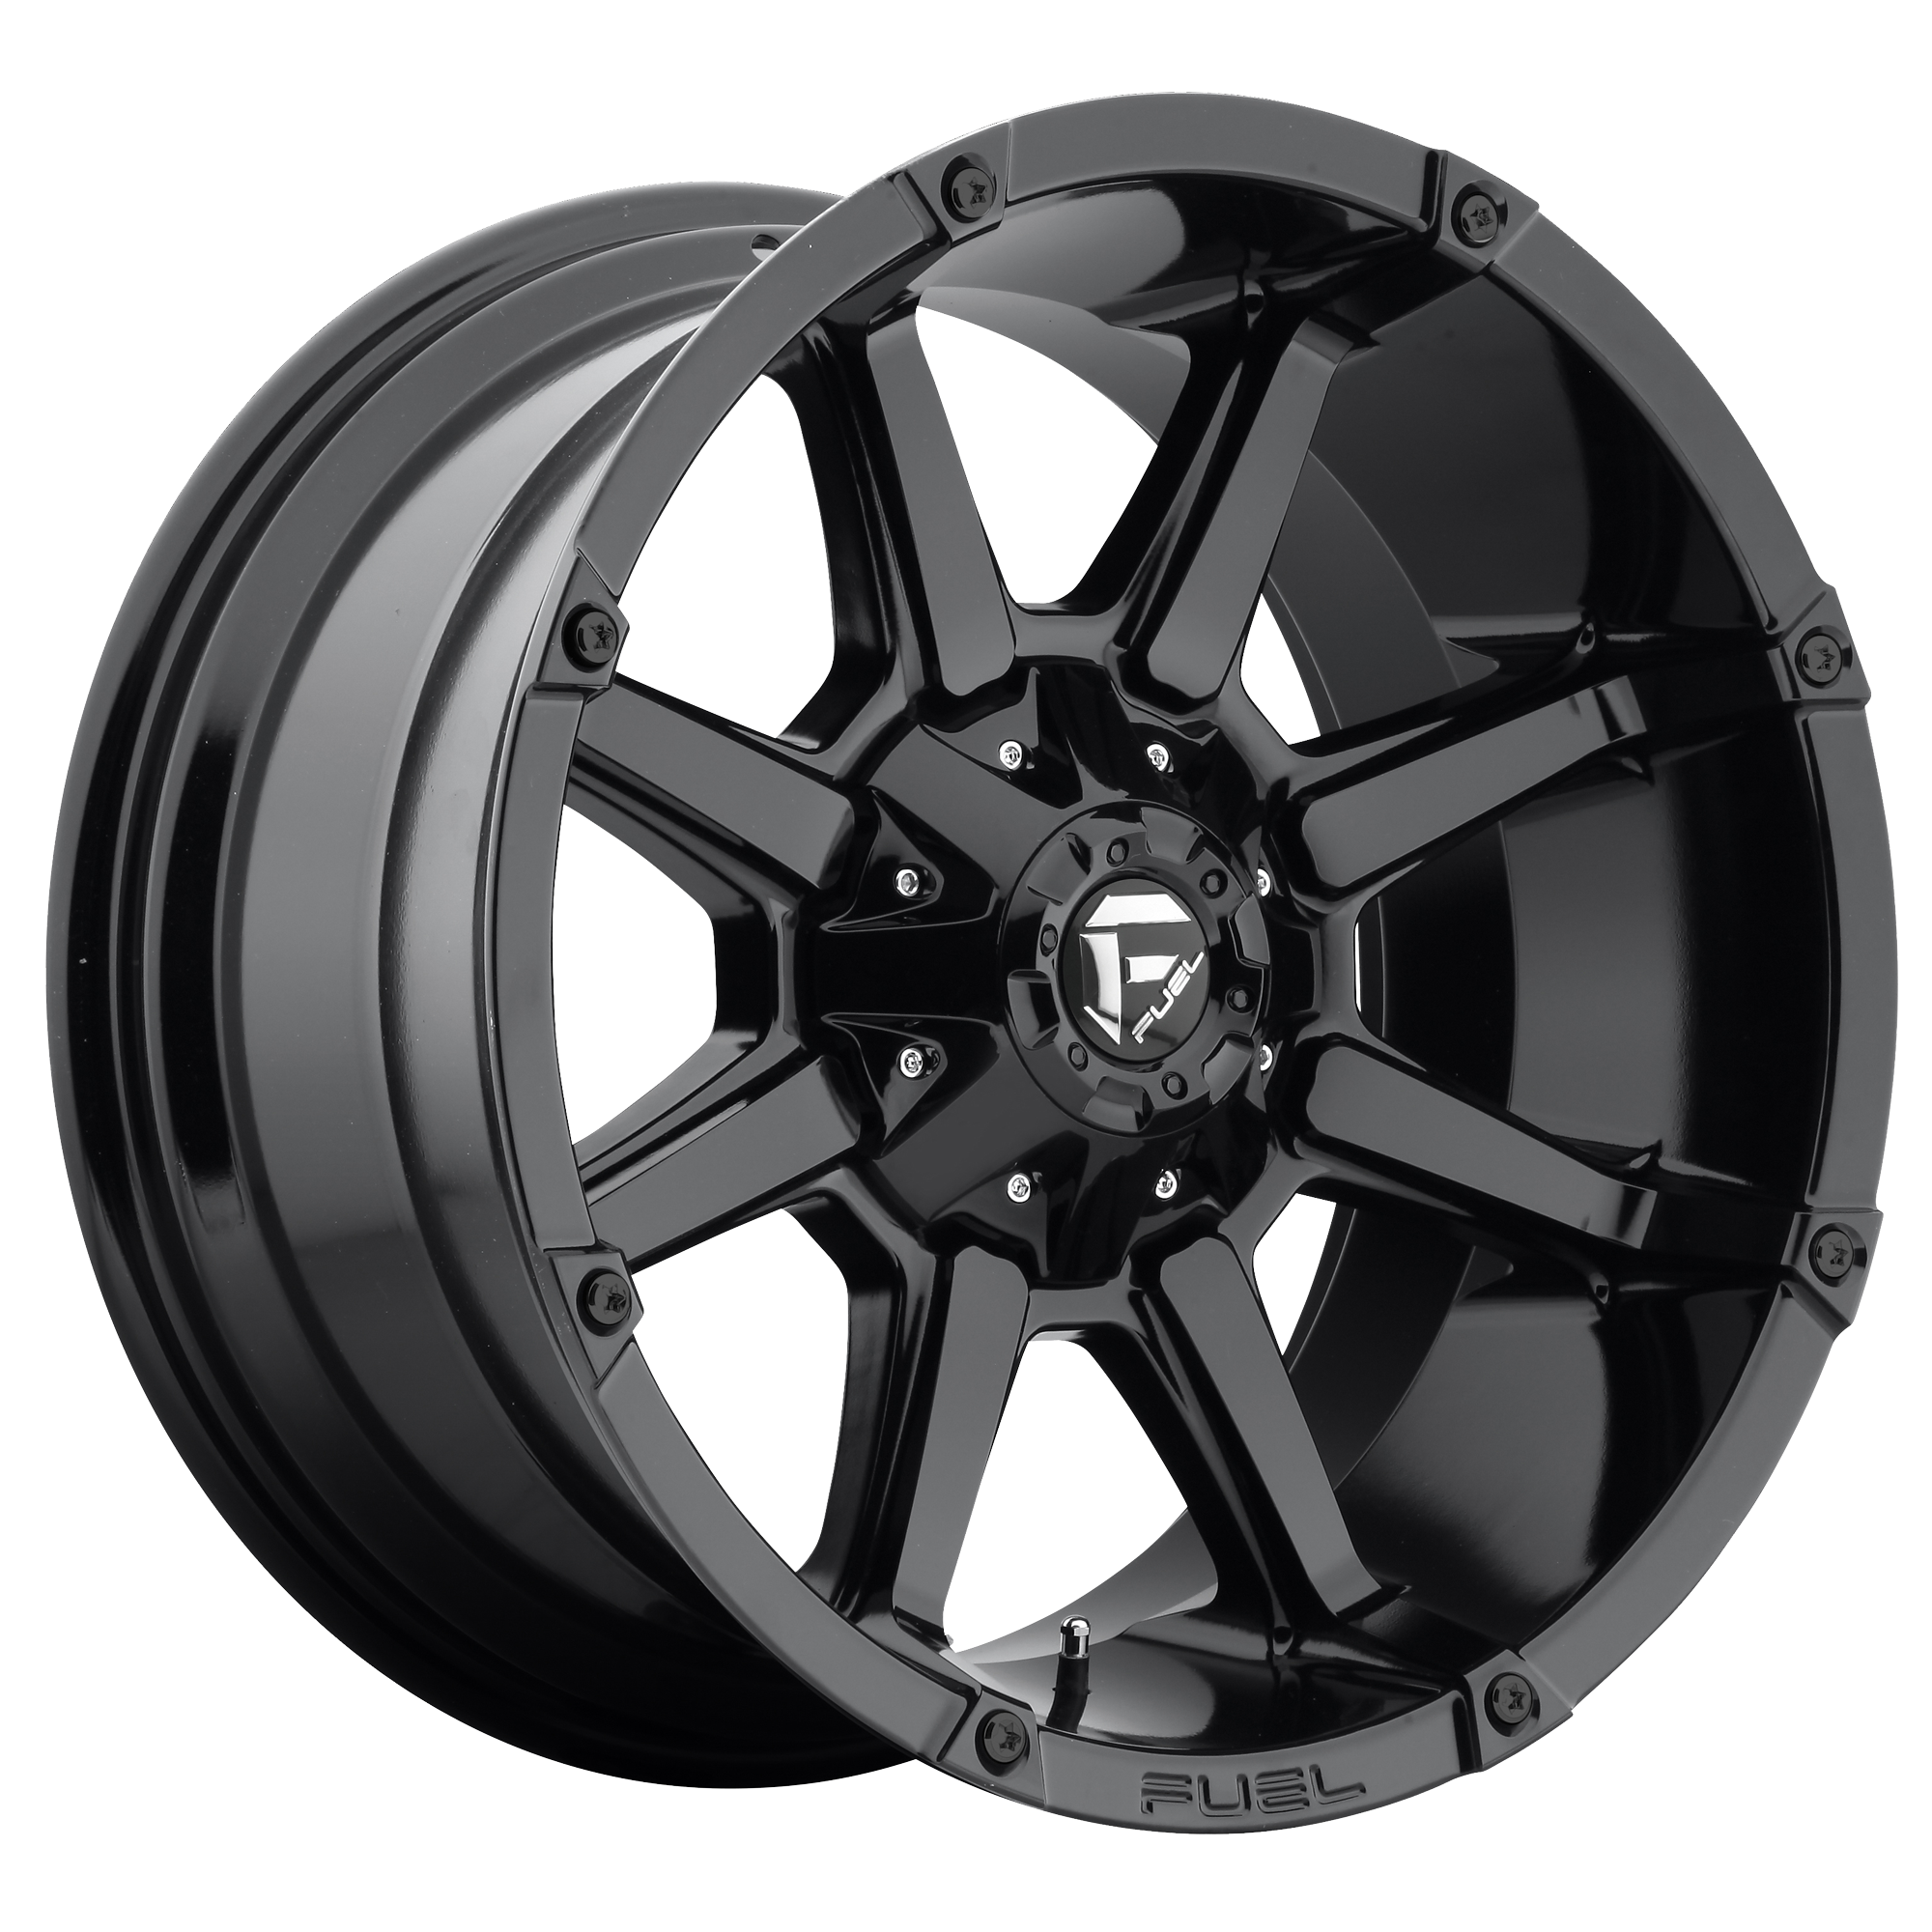 COUPLER 20x10 5x139.70/5x150.00 GLOSS BLACK (-24 mm) - Tires and Engine Performance